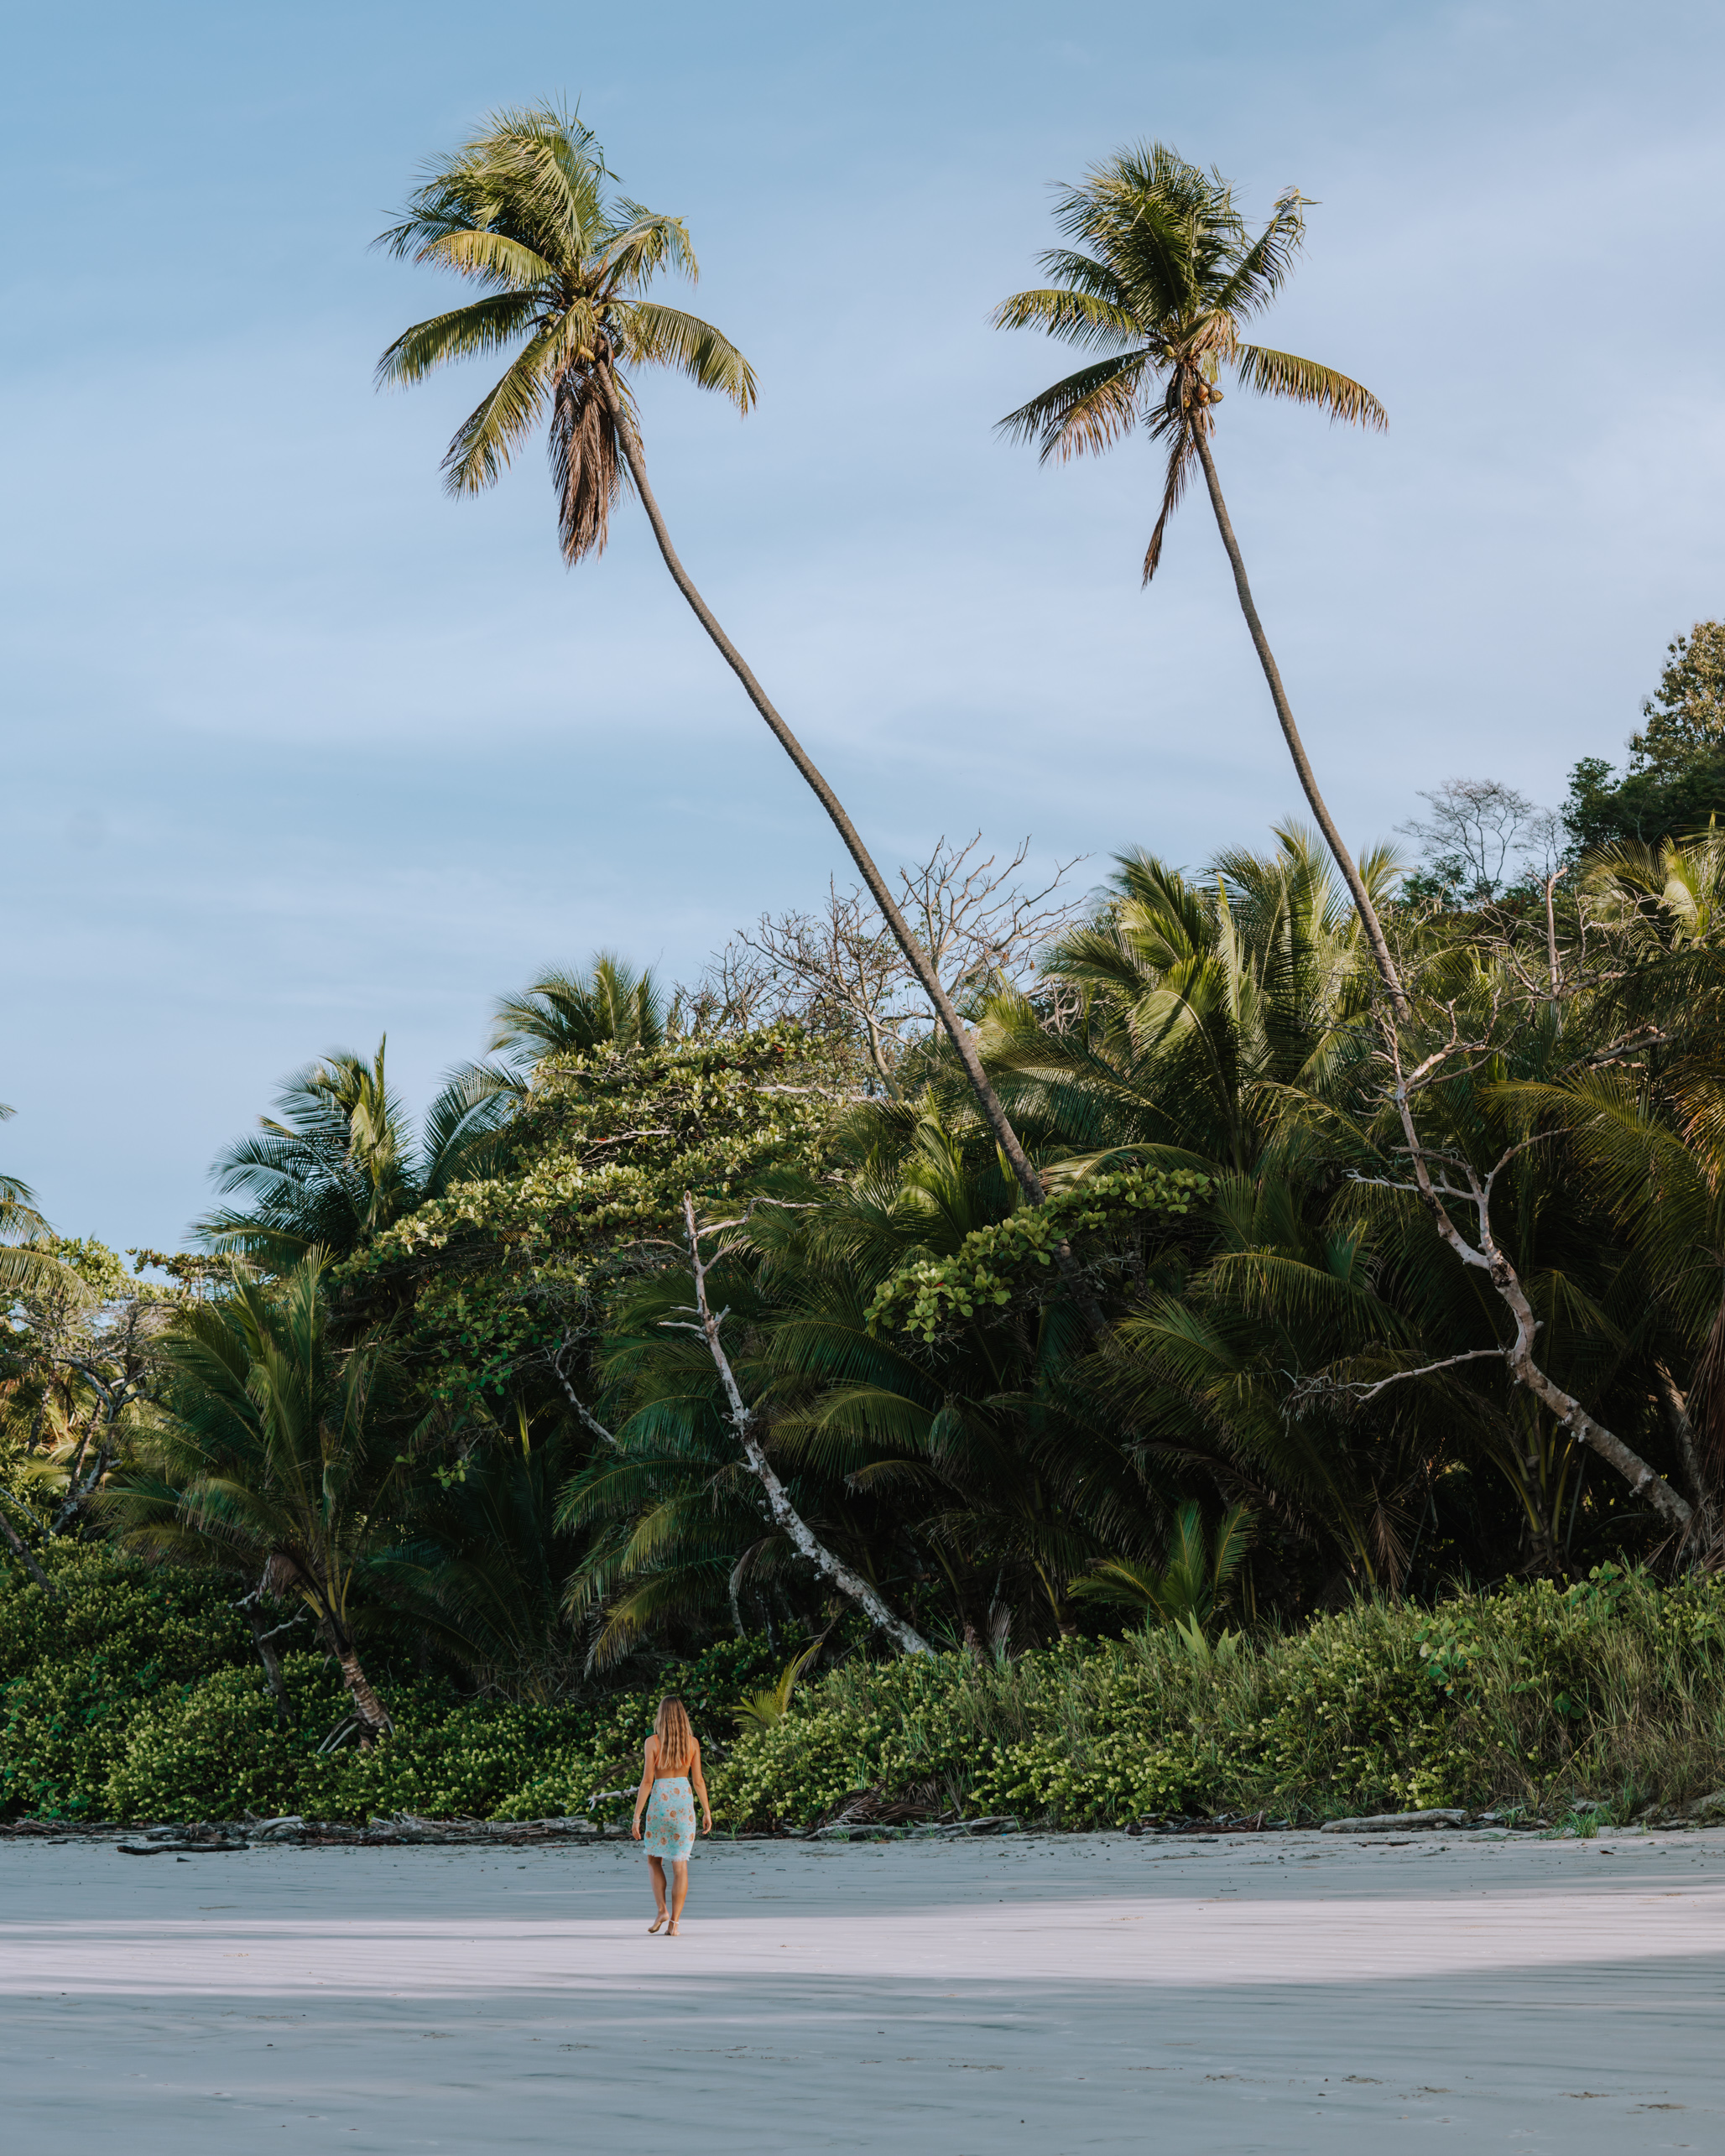 A woman walking on a Santa Teresa beach with palm trees in the background.